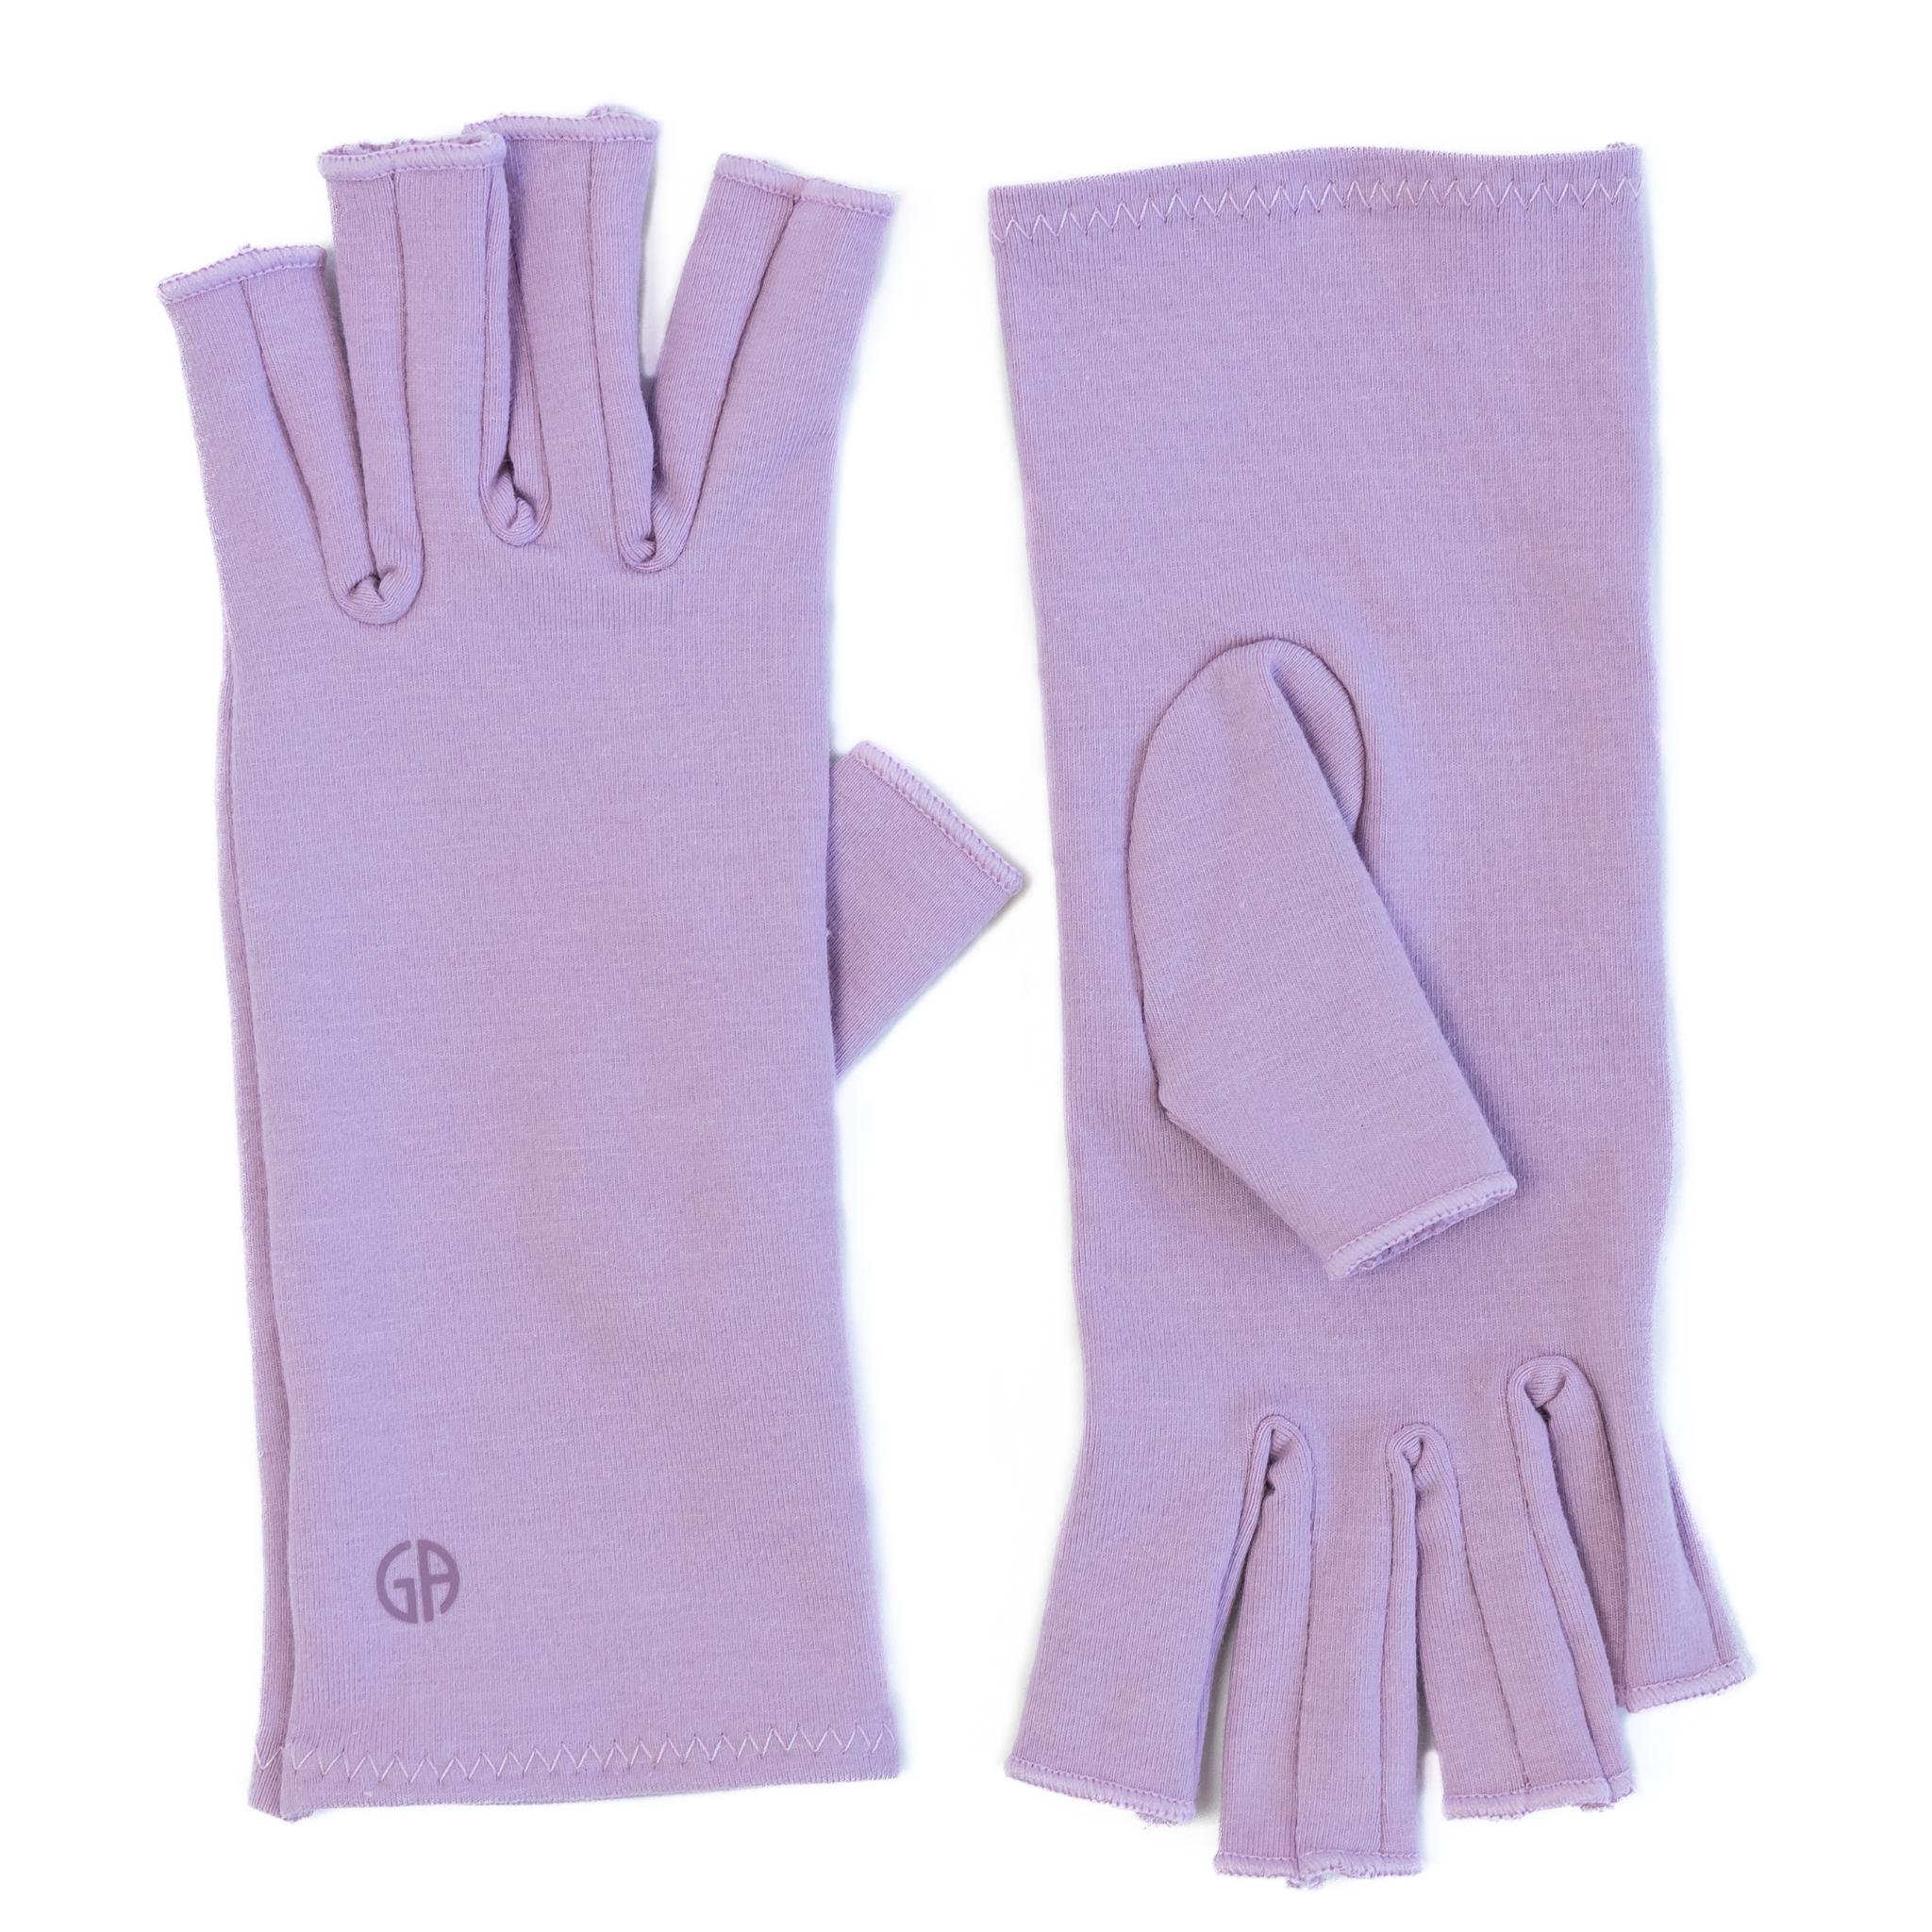 A pair of Dusky Lilac Compression Gloves, perfect for women with arthritis, is lying on a white background; (one glove is displaying the inner side, the other the outer)